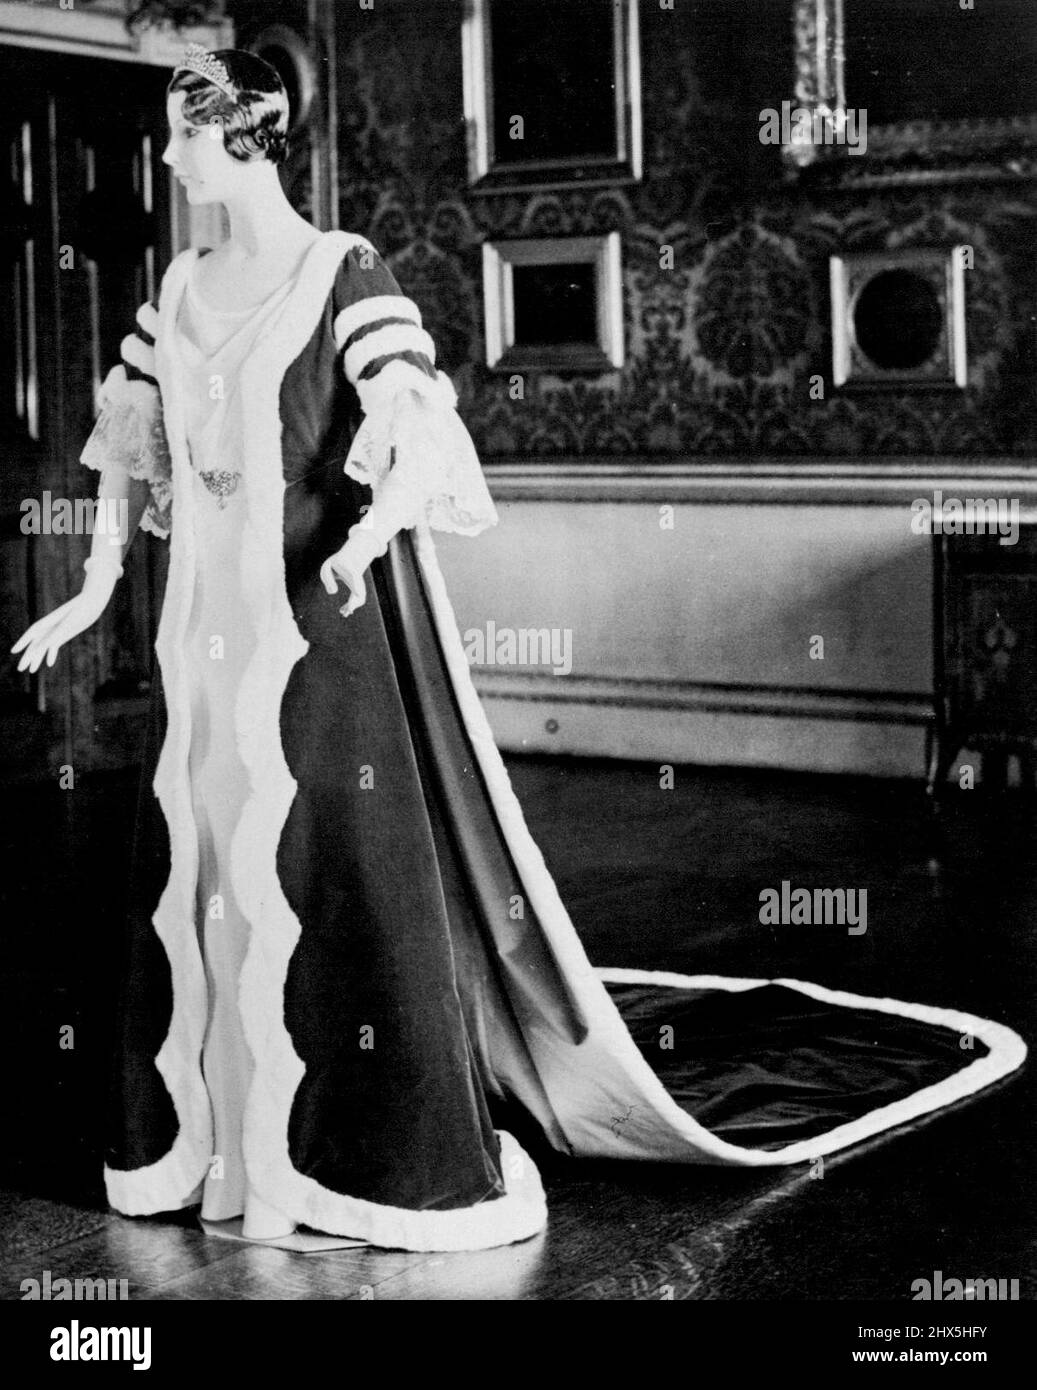 Peeress's Coronation Robe Our photographs shows a Coronations robe which will be worn by a Viscountess. The Kirtle and Train are of Crimson velvet with bordered edges of miniver (ermine). It was photographed at Norfolk House today, November 10. The hand-made lace trimming the sleeves can be worn at option. November 30, 1936. Stock Photo